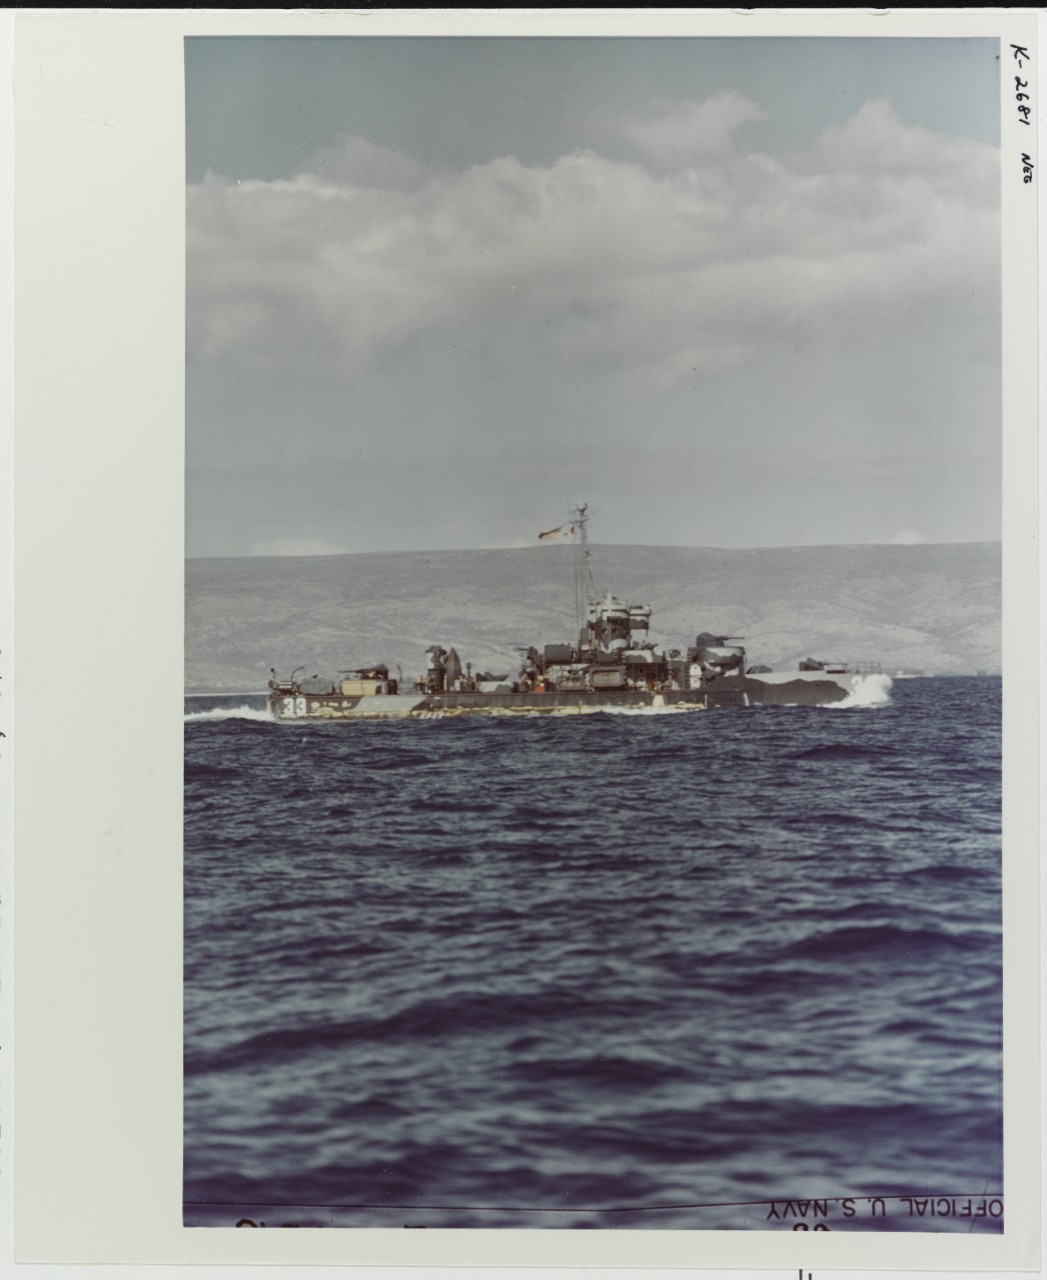 USS LCS-33 underway during maneuvers in the Pacific, circa Late 1944 or early 1945